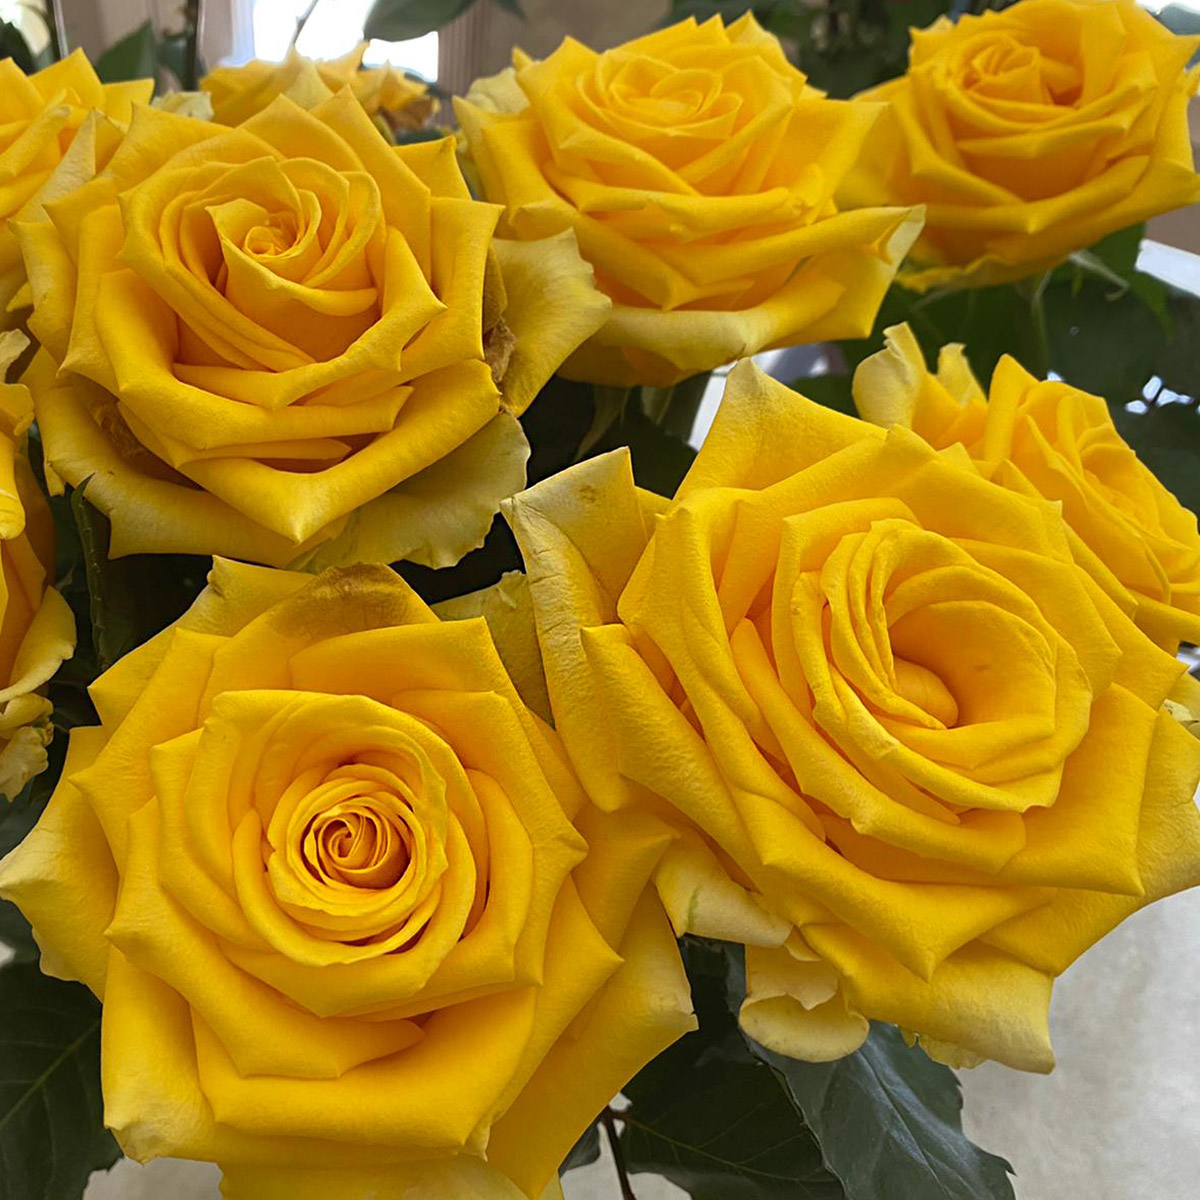 United Selections Present Its 'Autumn Selections' Roses - Rose Lighthouse 02